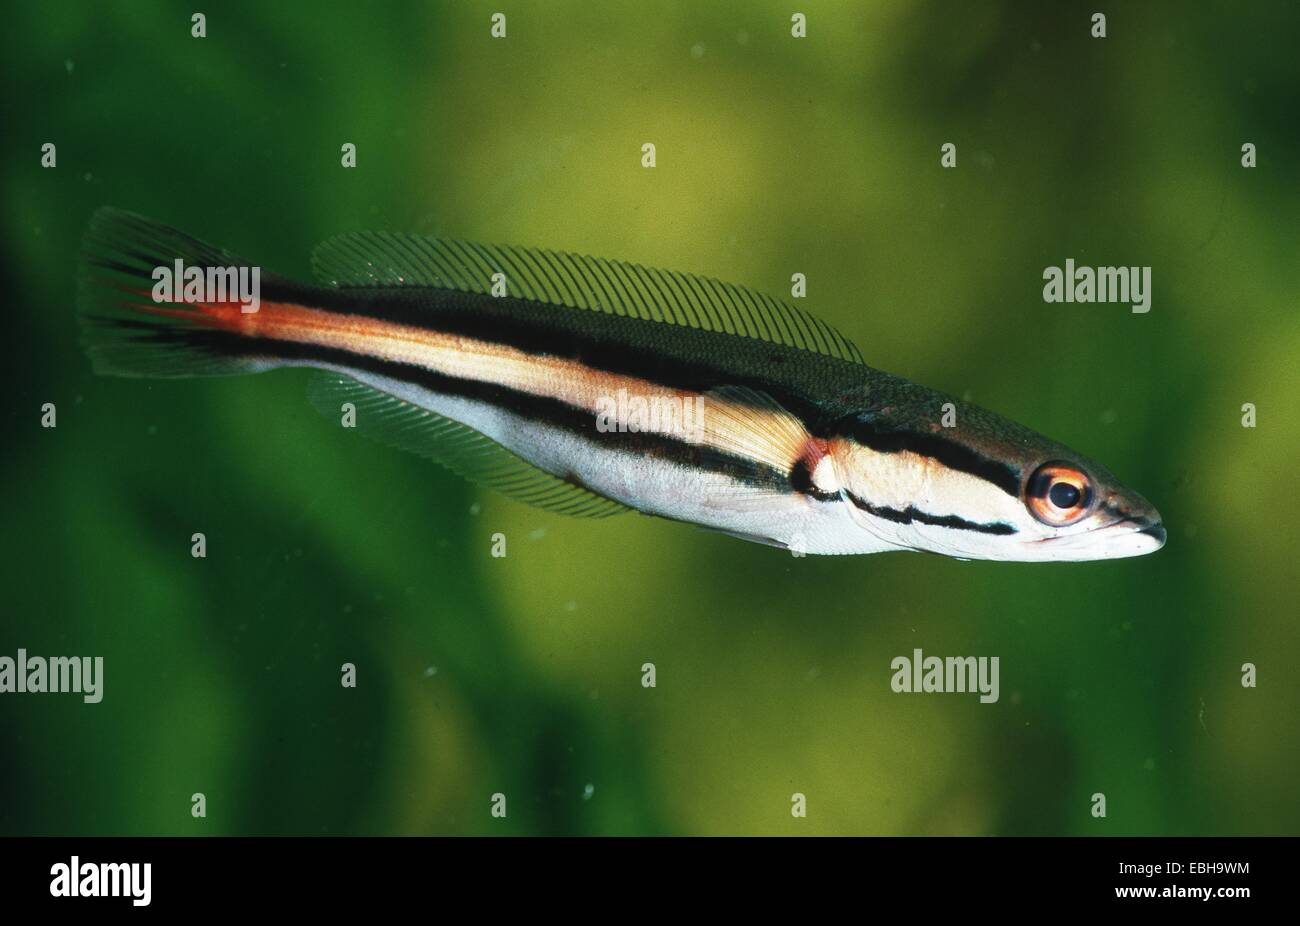 Indonesian snakehead (Channa micropeltes). Stock Photo